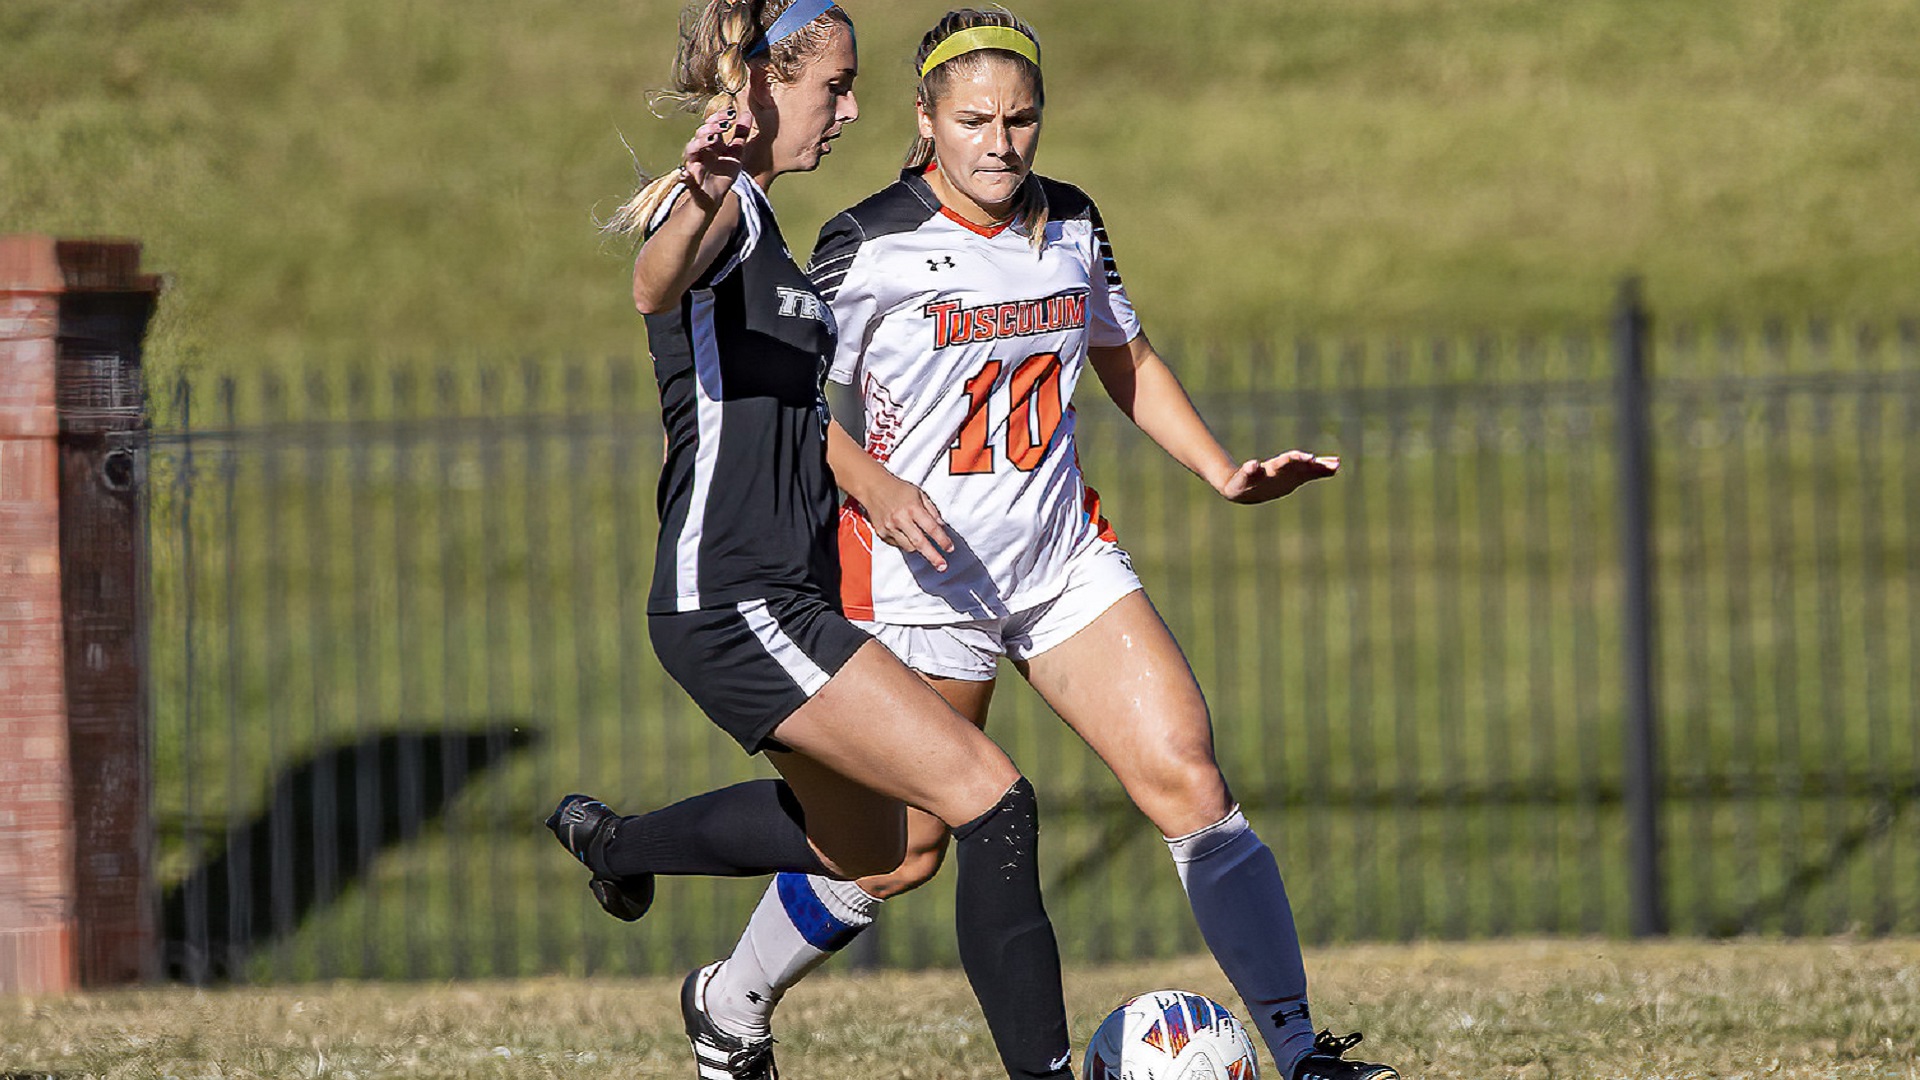 Bailey Bylotas assisted on both goals by the Pioneers against Anderson (photo by Chuck Williams)